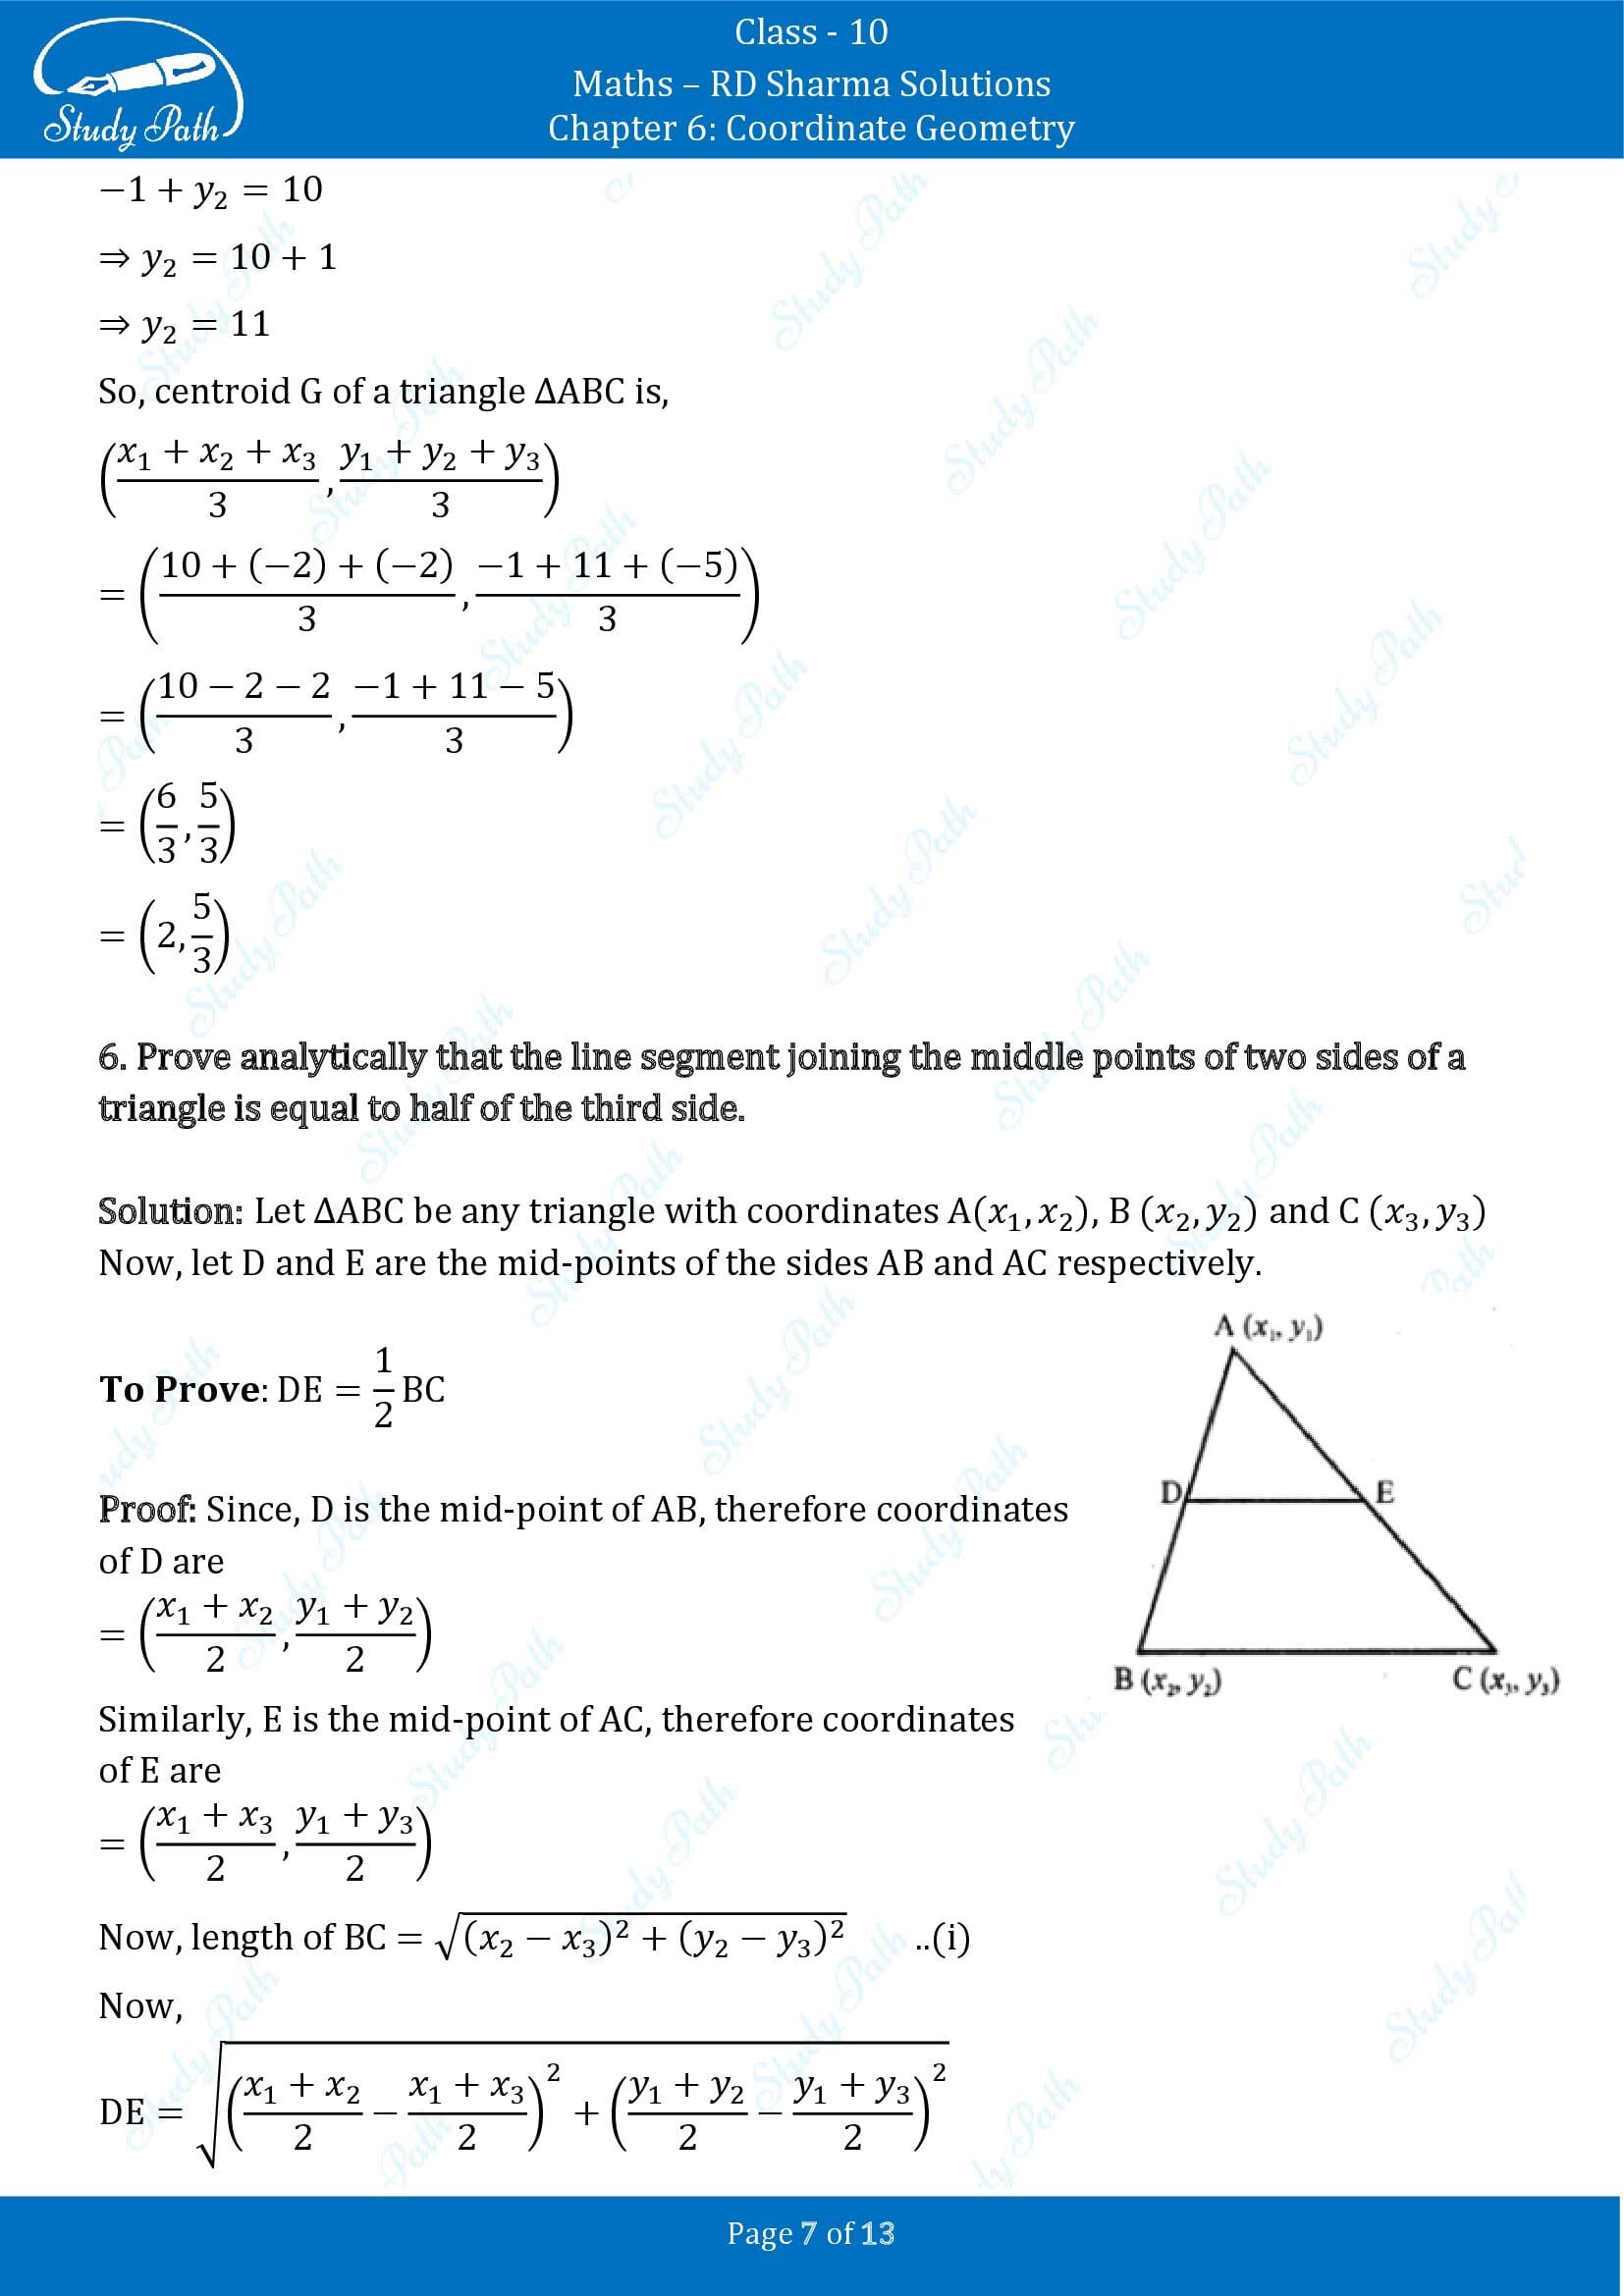 RD Sharma Solutions Class 10 Chapter 6 Coordinate Geometry Exercise 6.4 00007